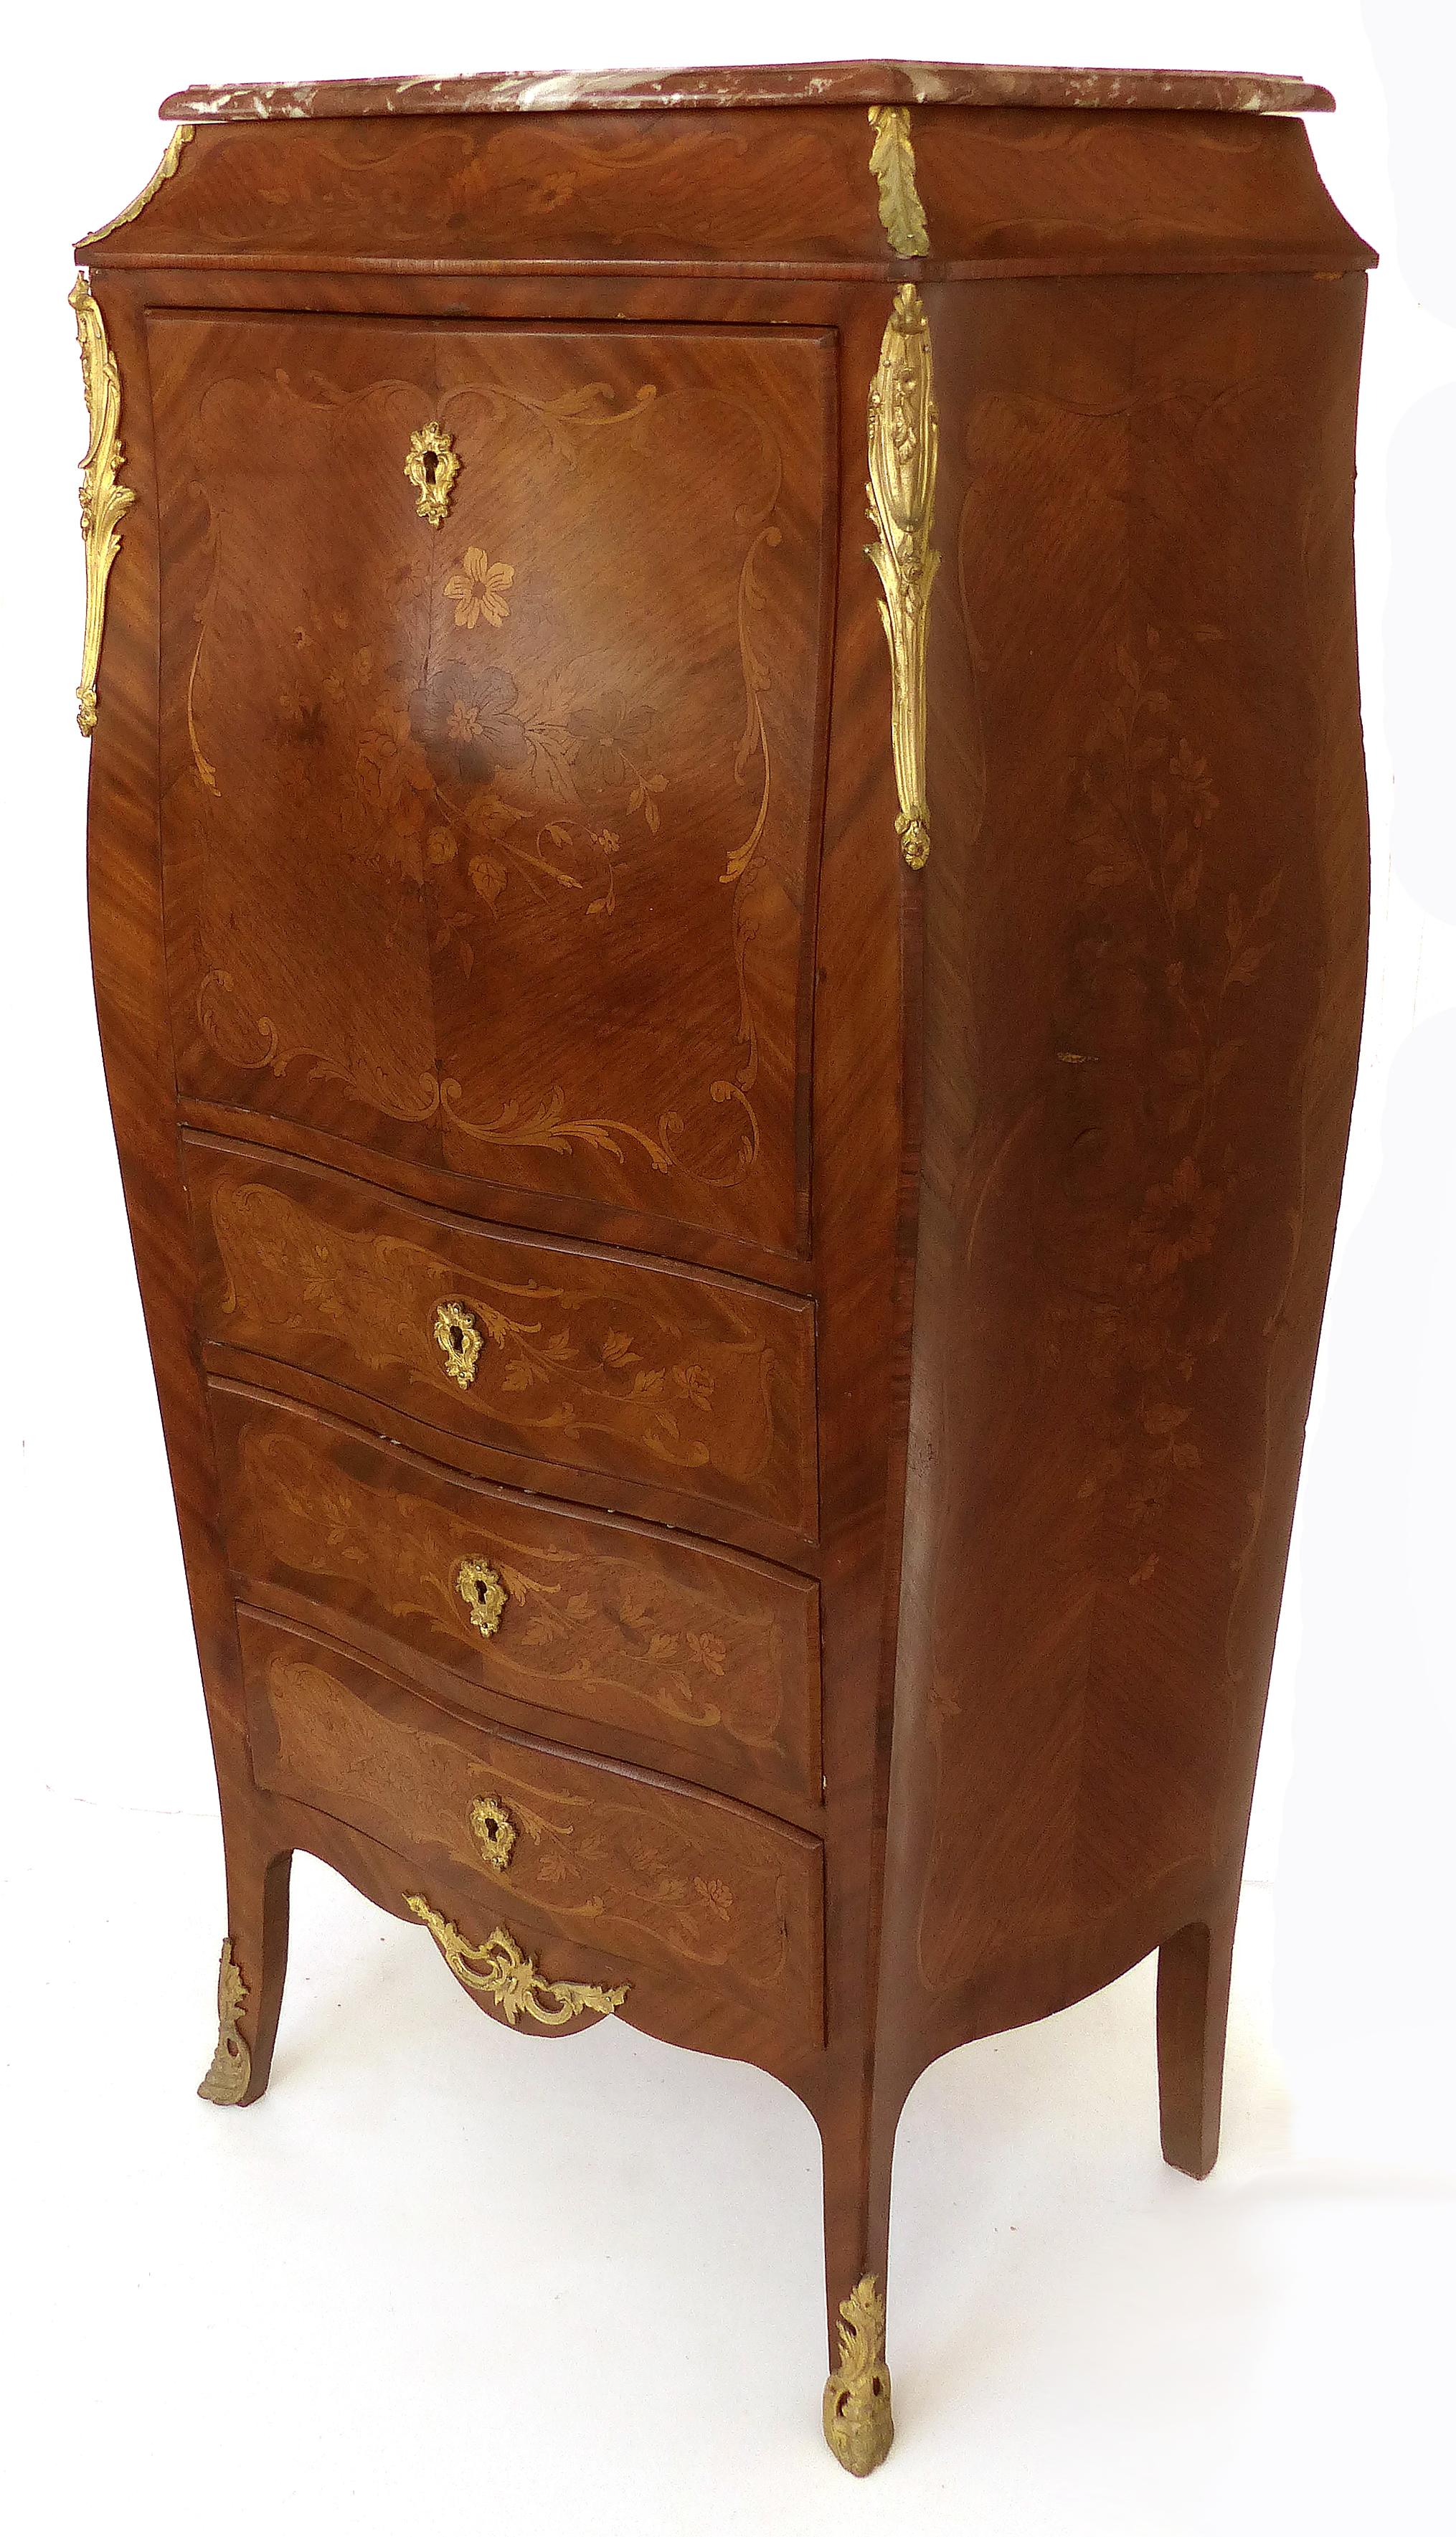 19th century bombe marquetry secrétaire à abattant, marble top and bronze mounts.

Offered for sale is a late 19th century Louis XV style bombe marquetry secrétaire à abattant with a marble top and bronze mounts. The secrétaire offers a fall front